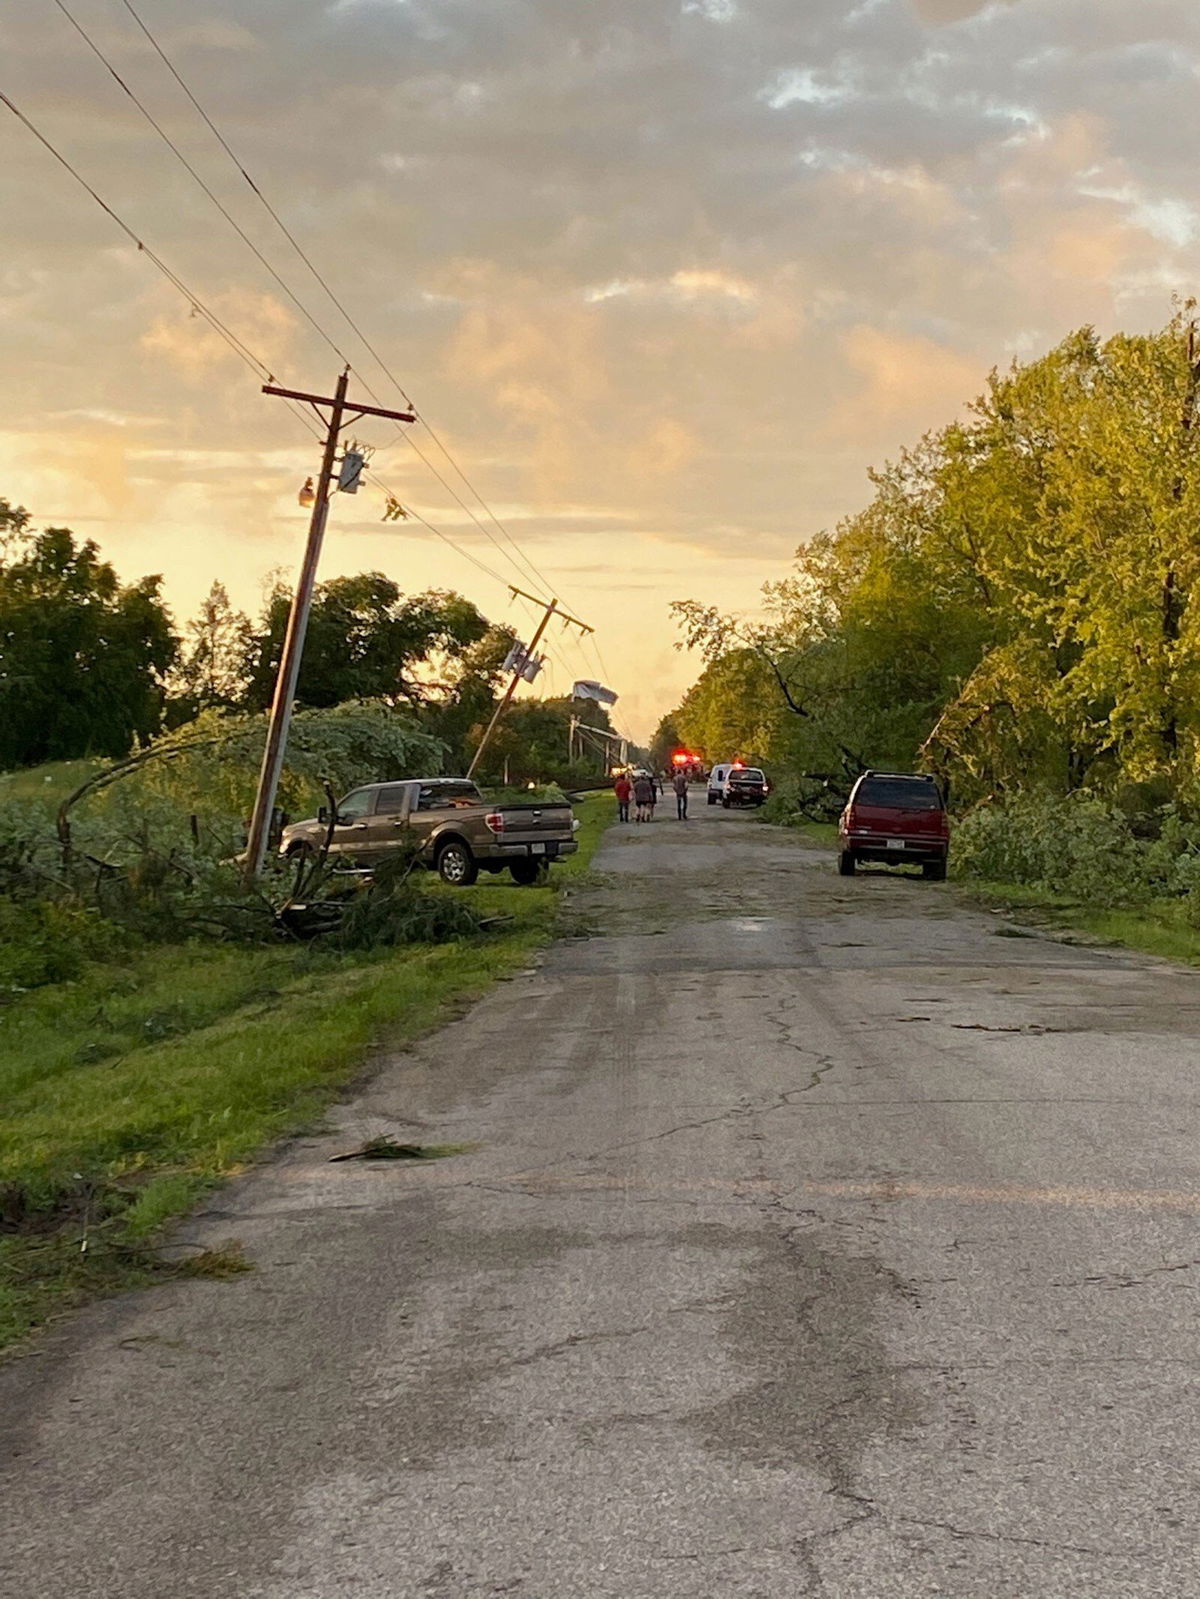 <i>From Monroe County Sheriff's Office Wisconsin</i><br/>A tornado was reported near Tomah